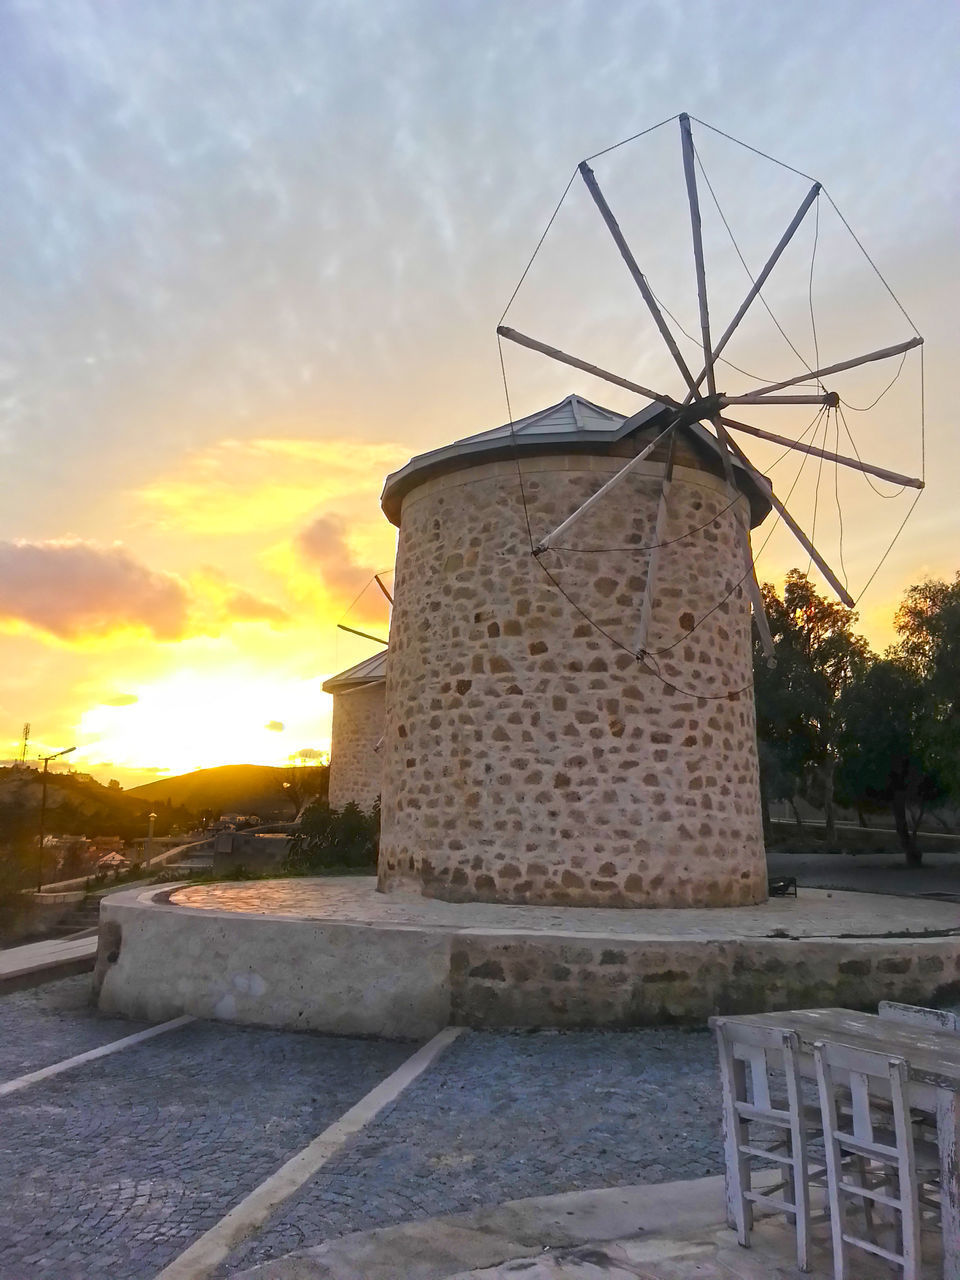 TRADITIONAL WINDMILL AT SUNSET